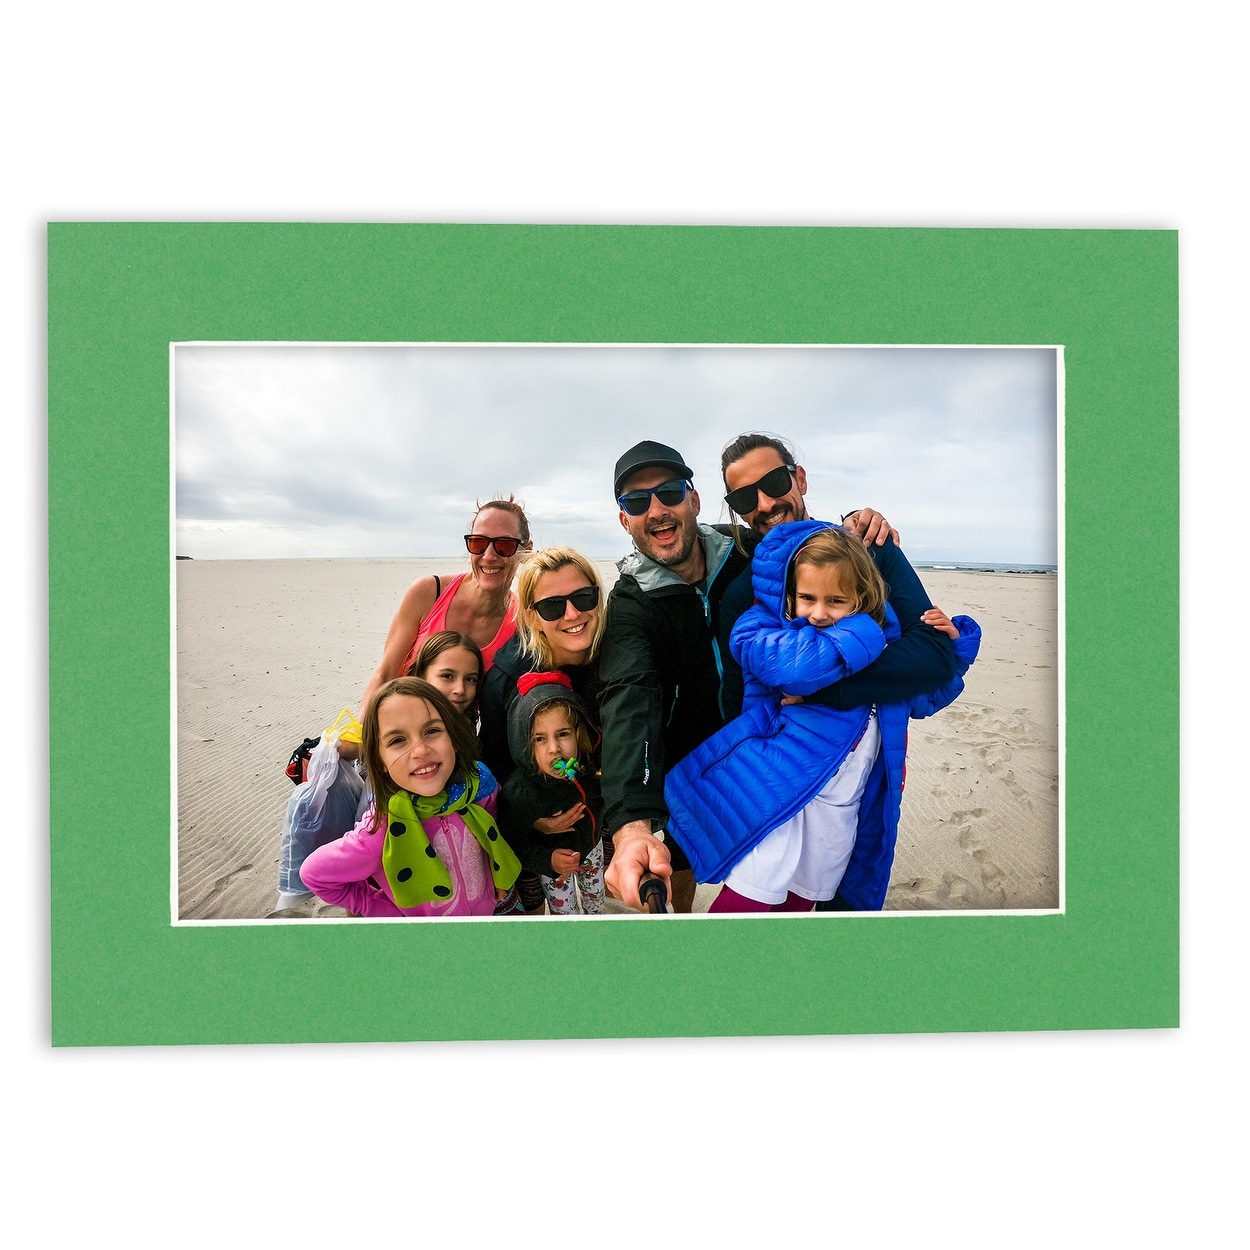 5x7 Mat for 8x10 Frame - Precut Mat Board Acid-Free Bright Green 5x7 Photo Matte Made to Fit A 8x10 Picture Frame